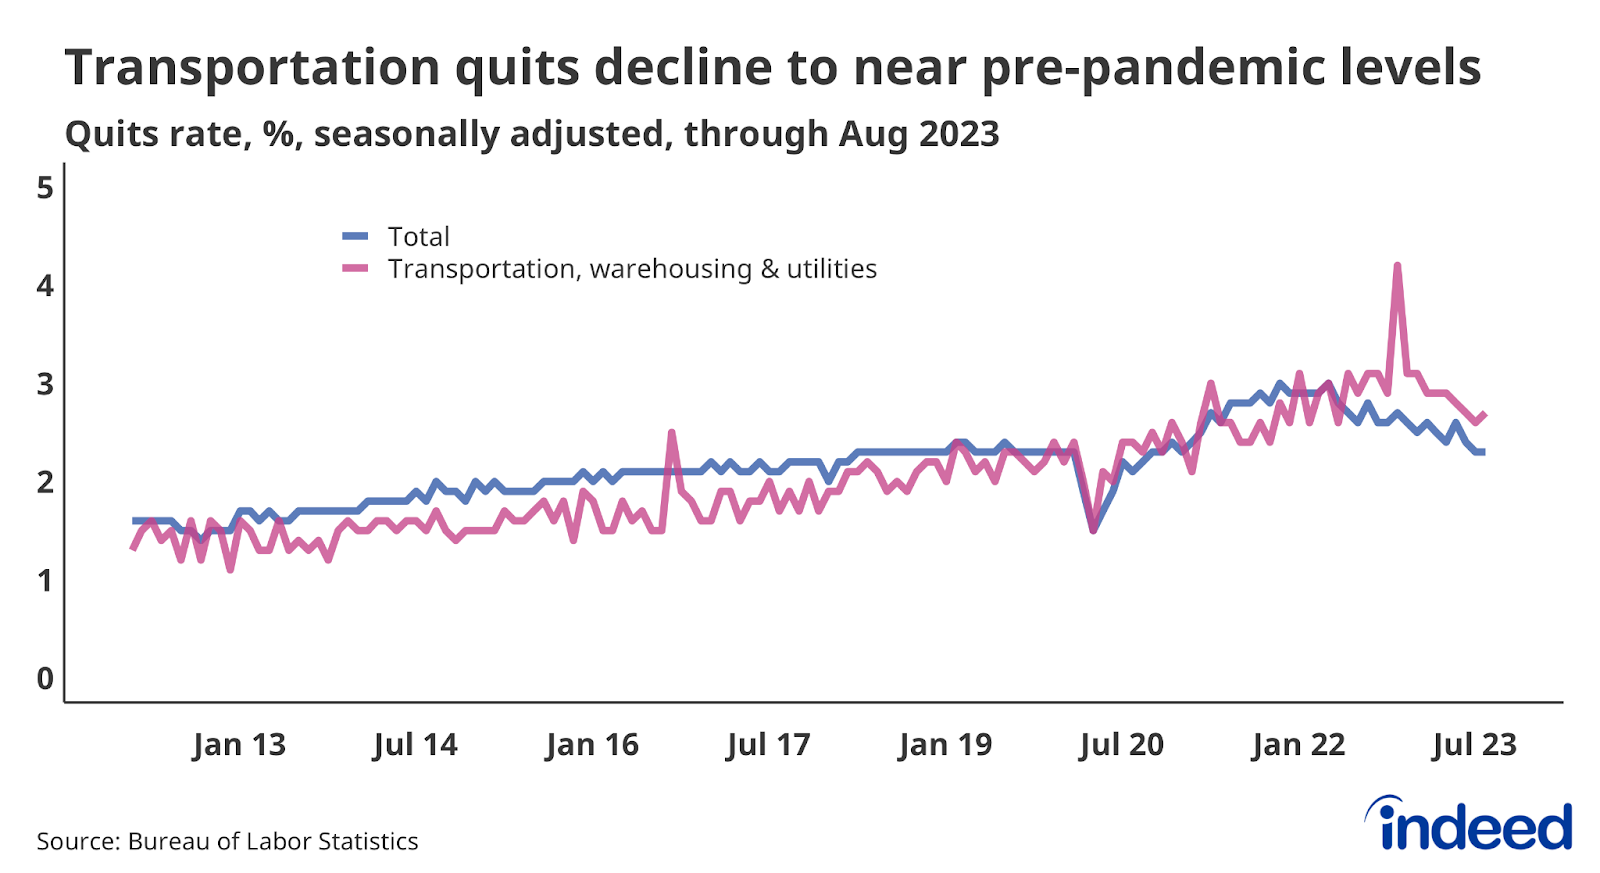 Line chart titled “Transportation quits decline to near pre-pandemic levels,” shows the quits rate, in %, for the total labor market and the Transportation, Warehousing & Utilities industry, through August 2023. Wage growth in both categories has fallen sharply in the past year.